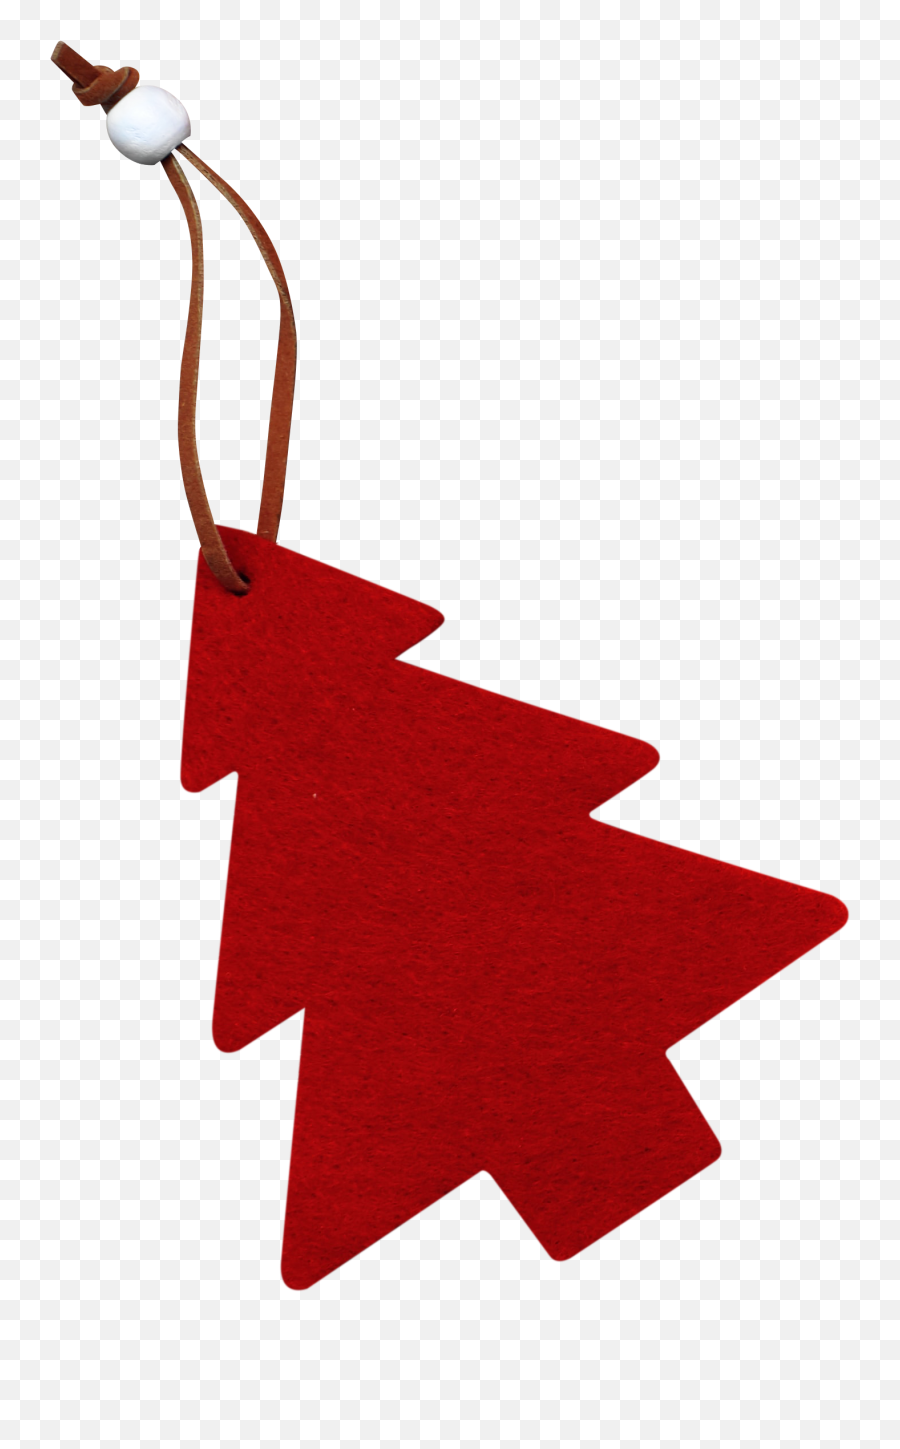 Red Christmas Tree Png - For Holiday,Red Christmas Ornament Png